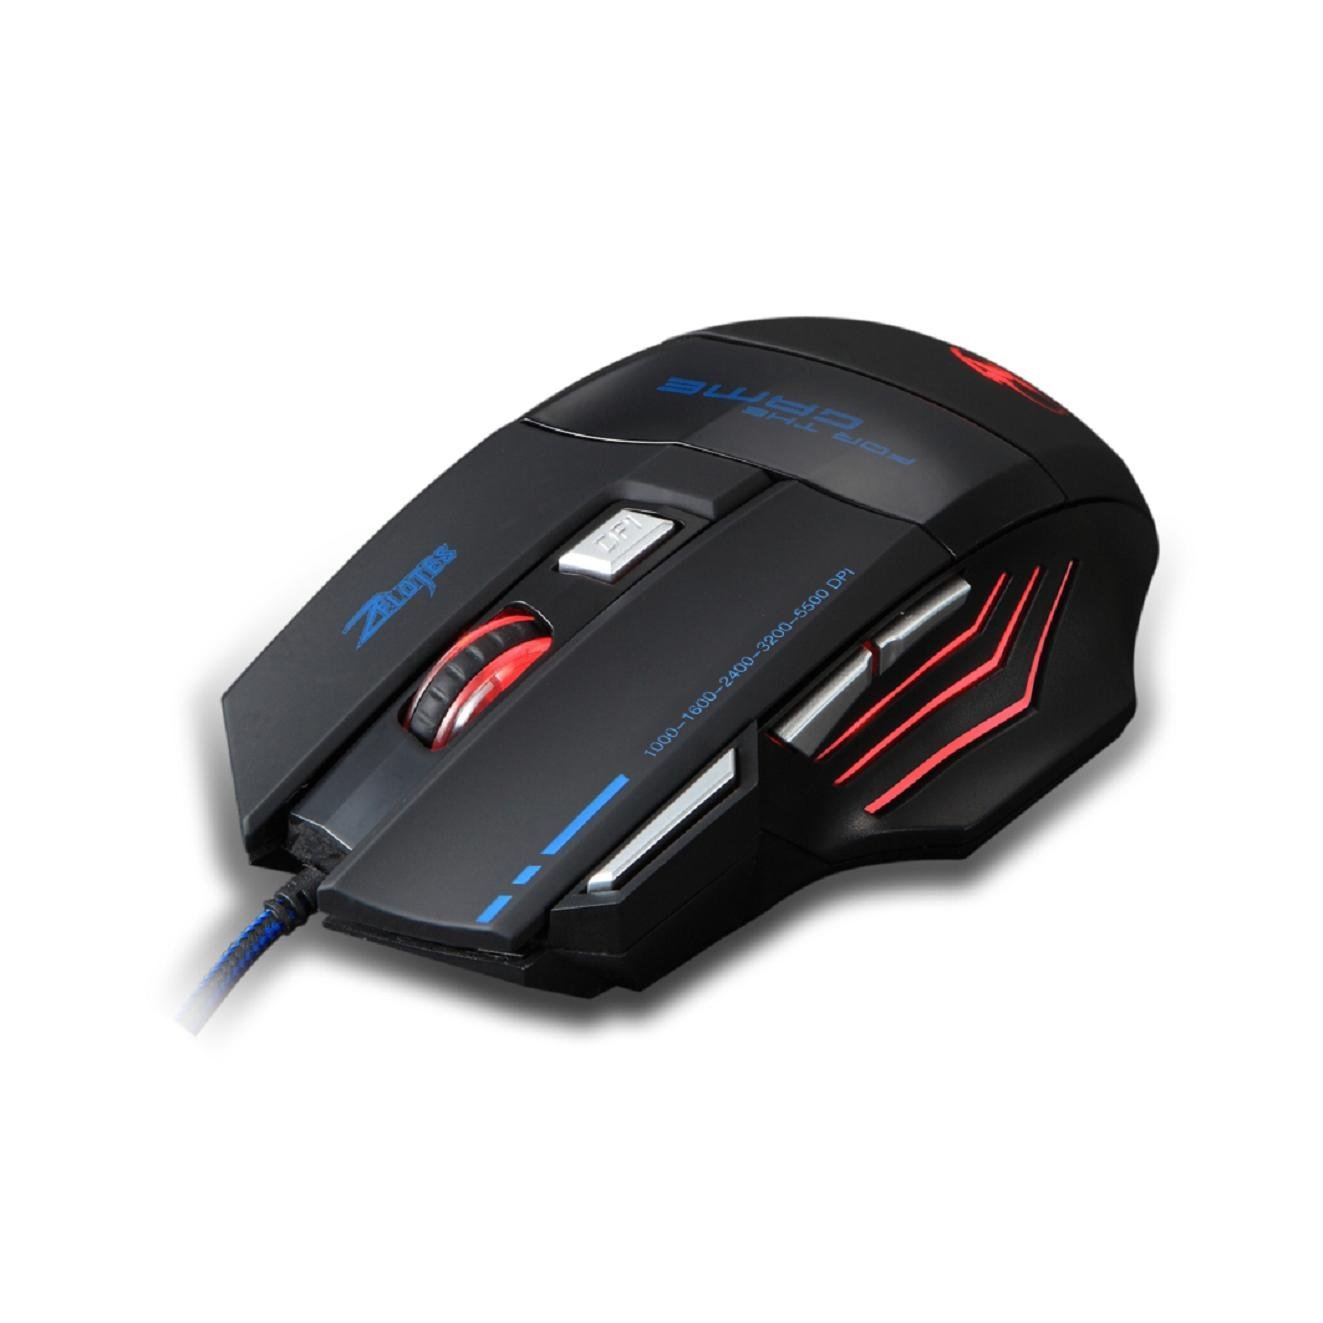 5500DPI 7 Button LED Optical USB Wired Gaming Mouse Mice For Pro Gamer Mouse BK 